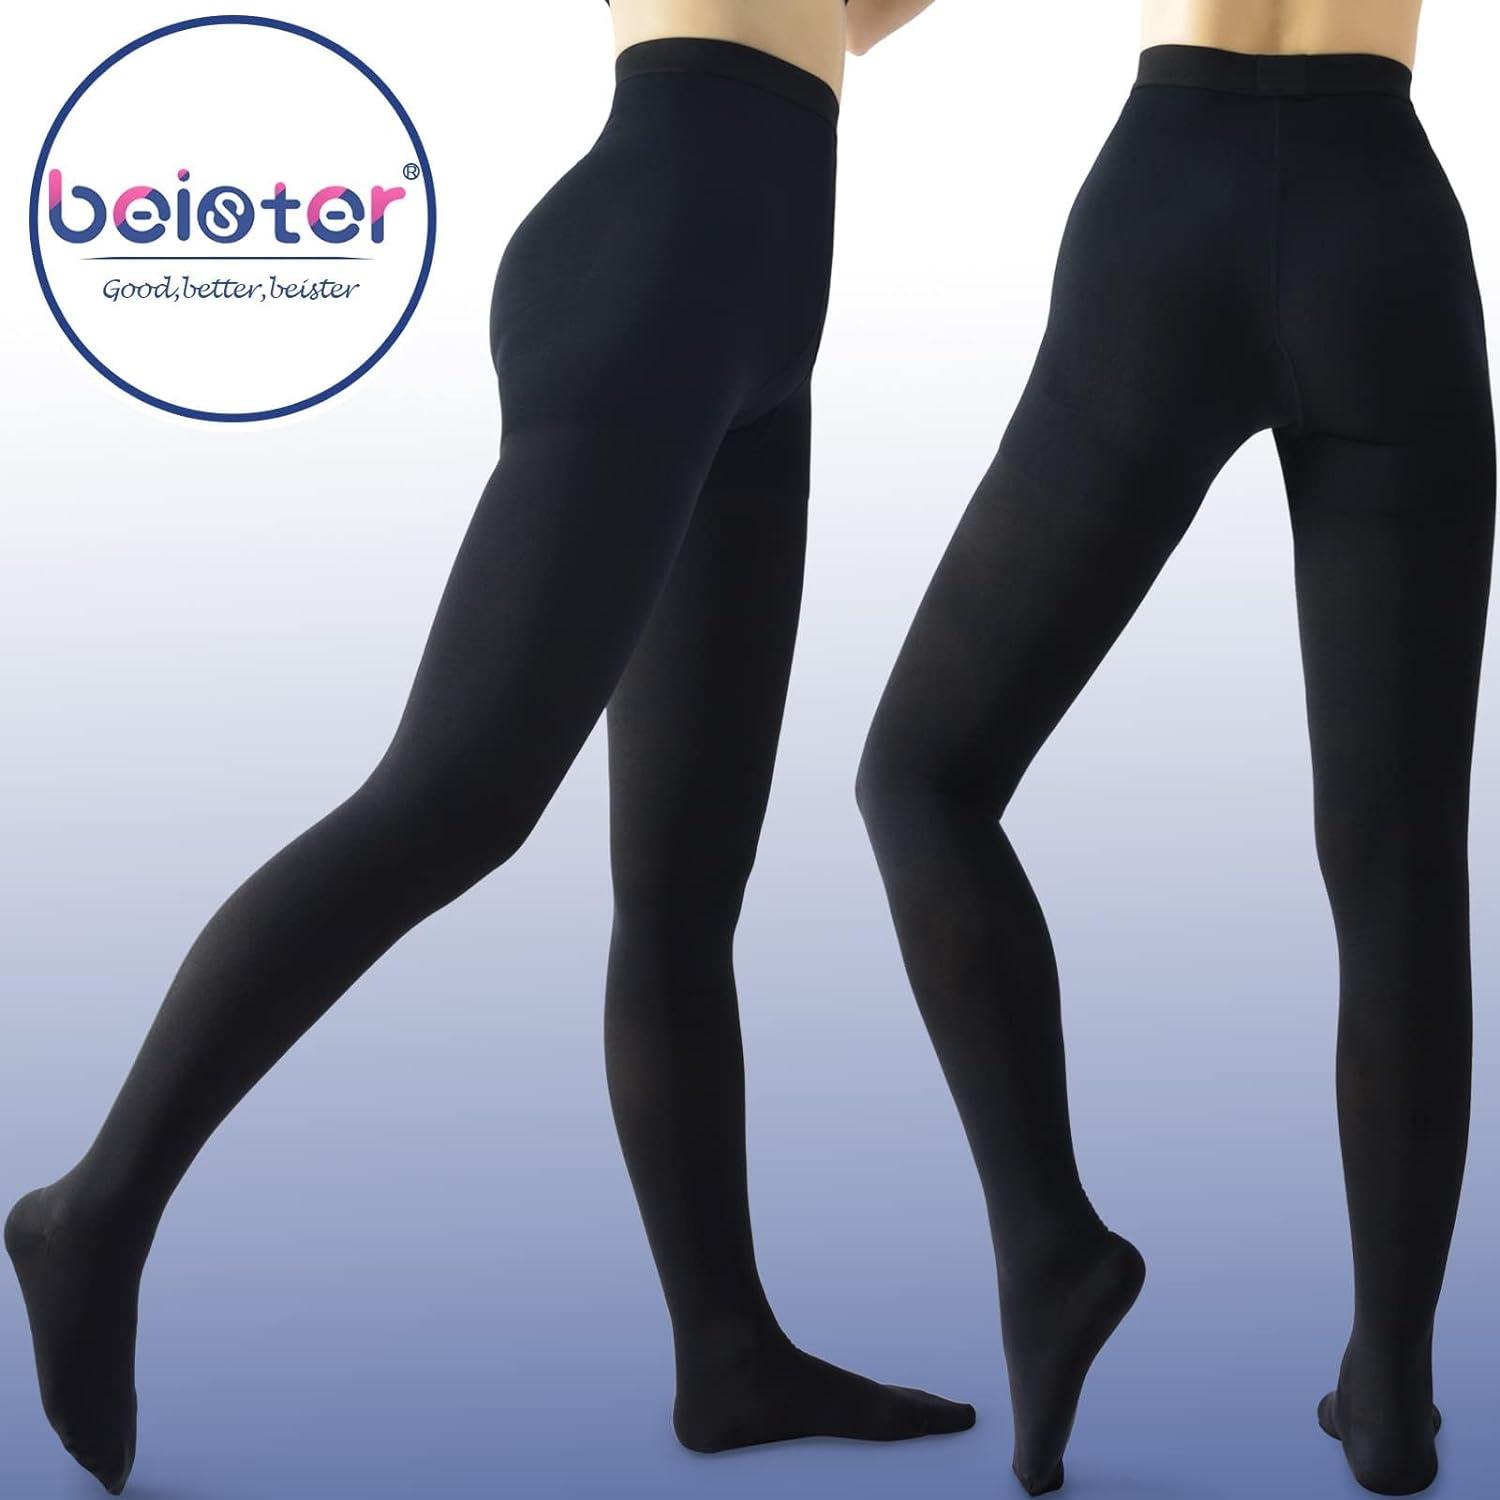  Beister Medical Compression Tights, 20-30 mmHg Thin Footless  Graduated Support Pantyhose For Women & Men, High Waist Circulation  Compression Leggings For Varicose Veins, Edema, DVT, Leg Pain